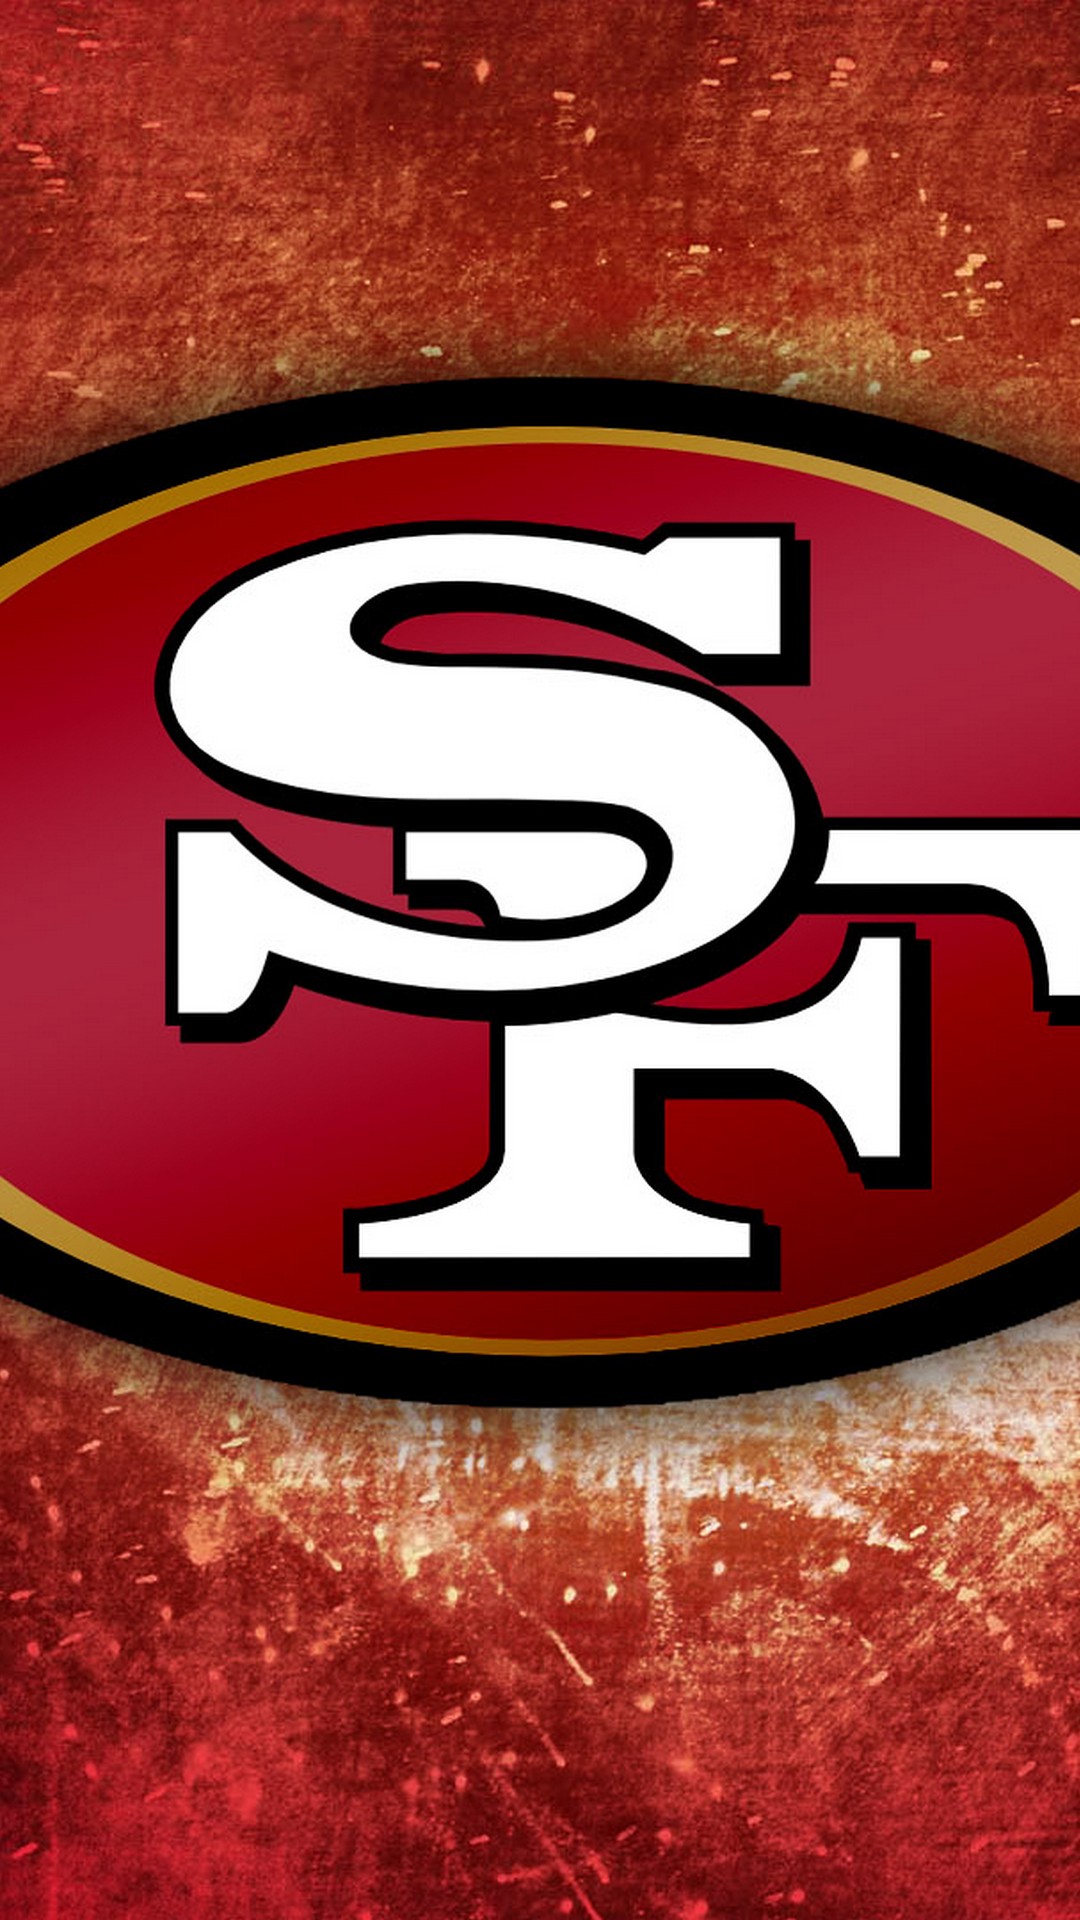 Wallpaper San Francisco 49ers for iPhone With high-resolution 1080X1920 pixel. You can use this wallpaper for your iPhone 5, 6, 7, 8, X, XS, XR backgrounds, Mobile Screensaver, or iPad Lock Screen